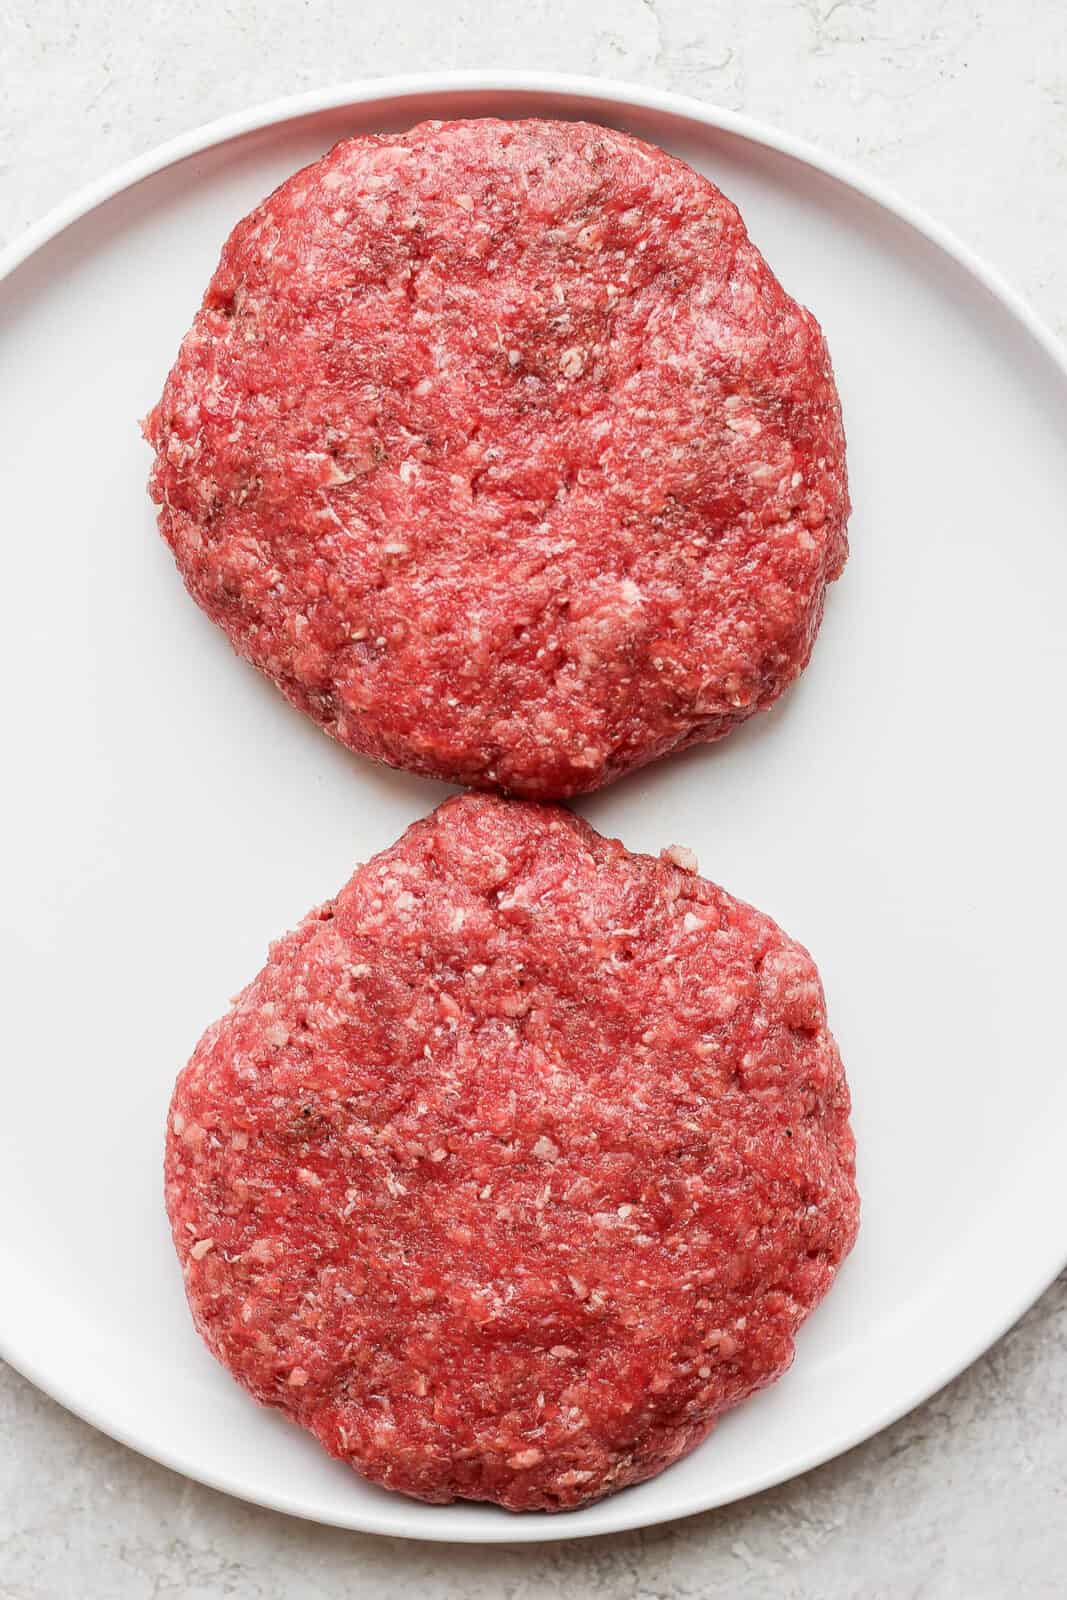 Two bison burger patties on a plate.